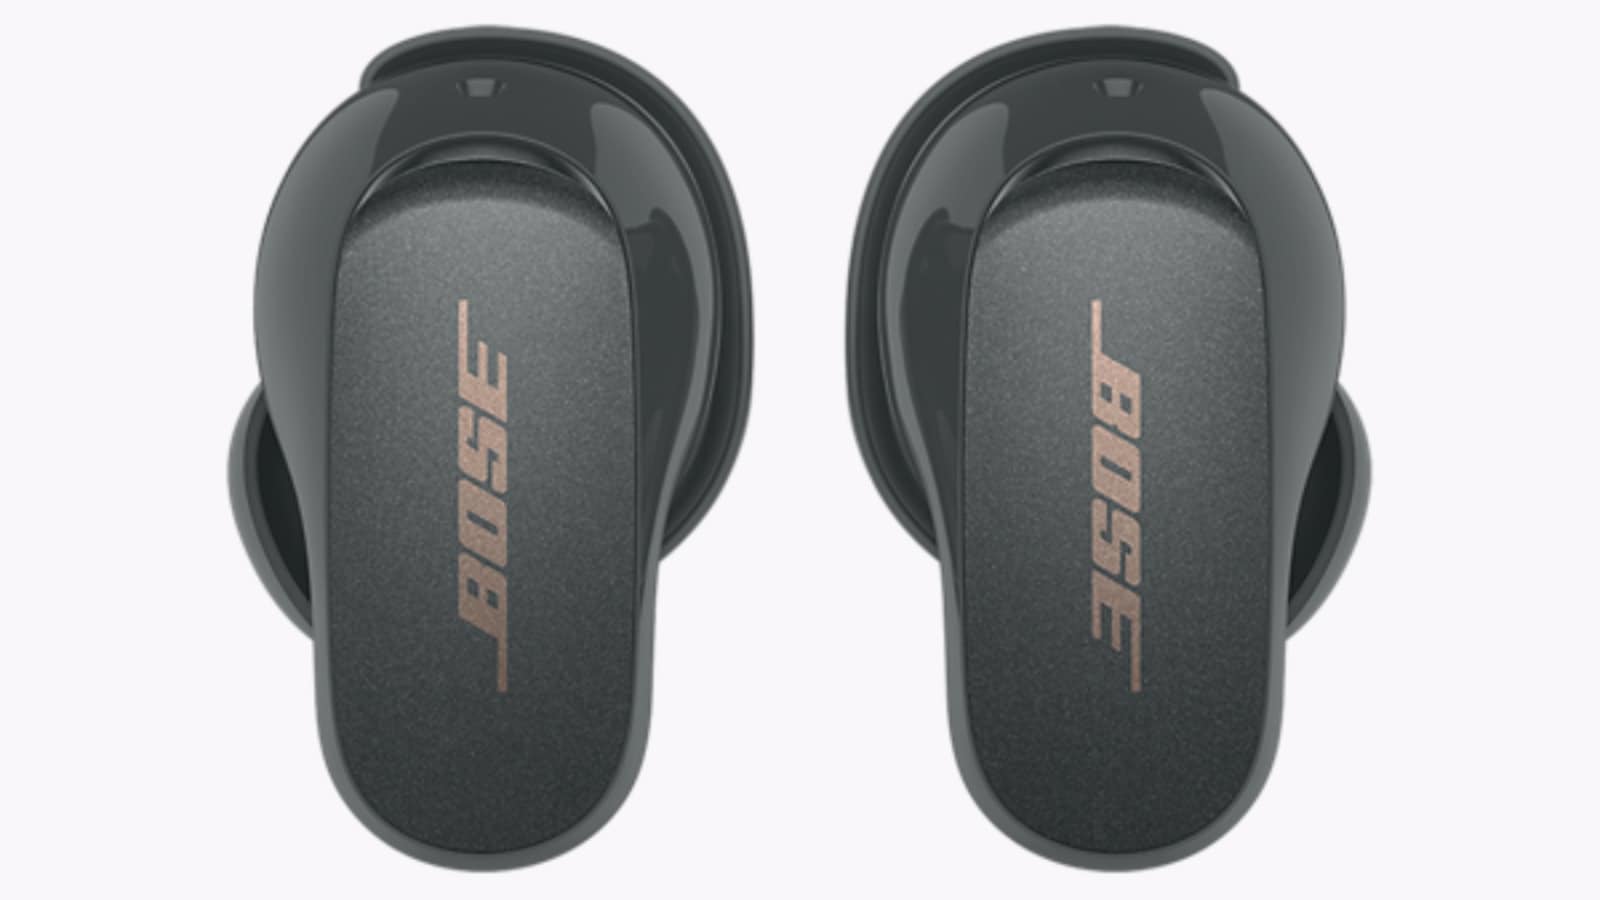 Bose dials up spatial audio with new headphones and earbuds